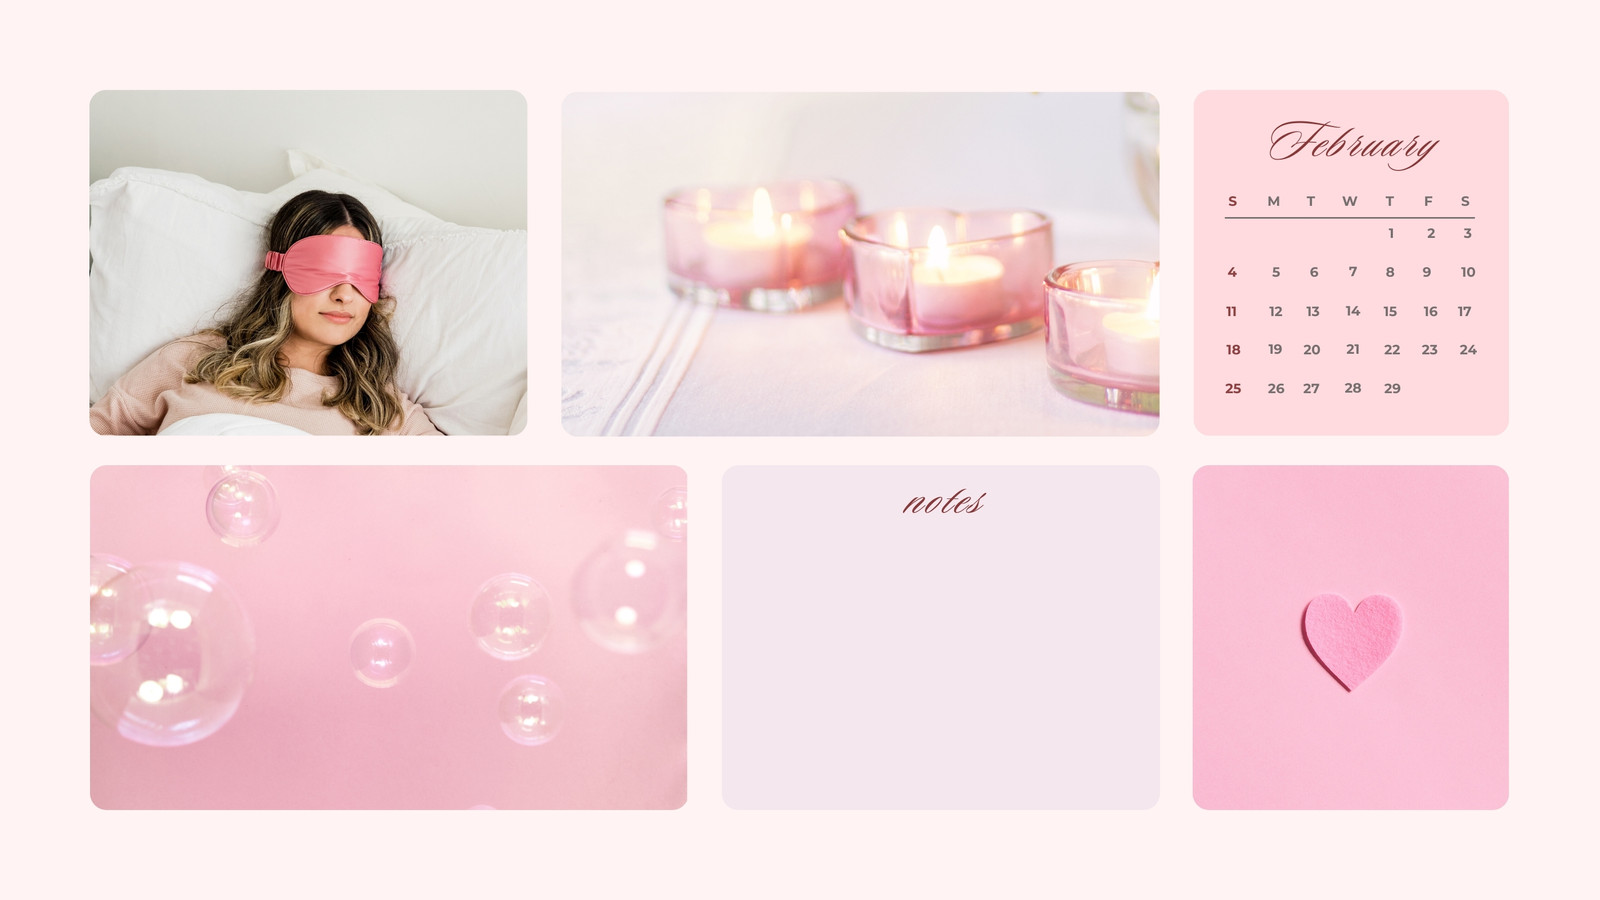 Customize 2,828+ Pink Aesthetic Wallpaper Templates Online - Canva